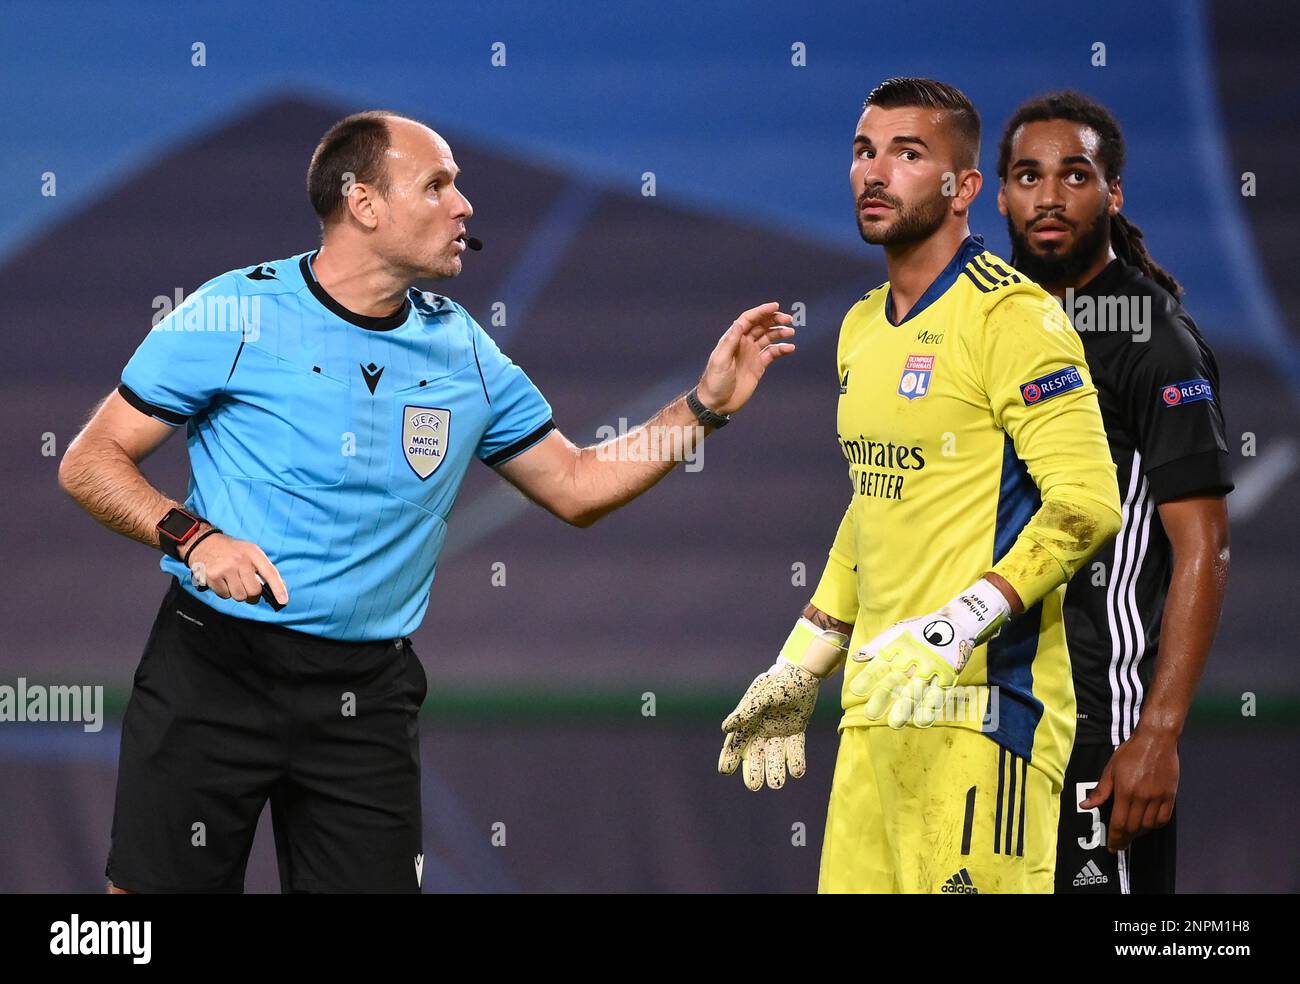 Referee Antonio Mateu Lahoz, left, discusses with Lyon's goalkeeper Anthony  Lopes, centre, and Lyon's Jason Denayer during the Champions League  semifinal soccer match between Lyon and Bayern at the Jose Alvalade stadium